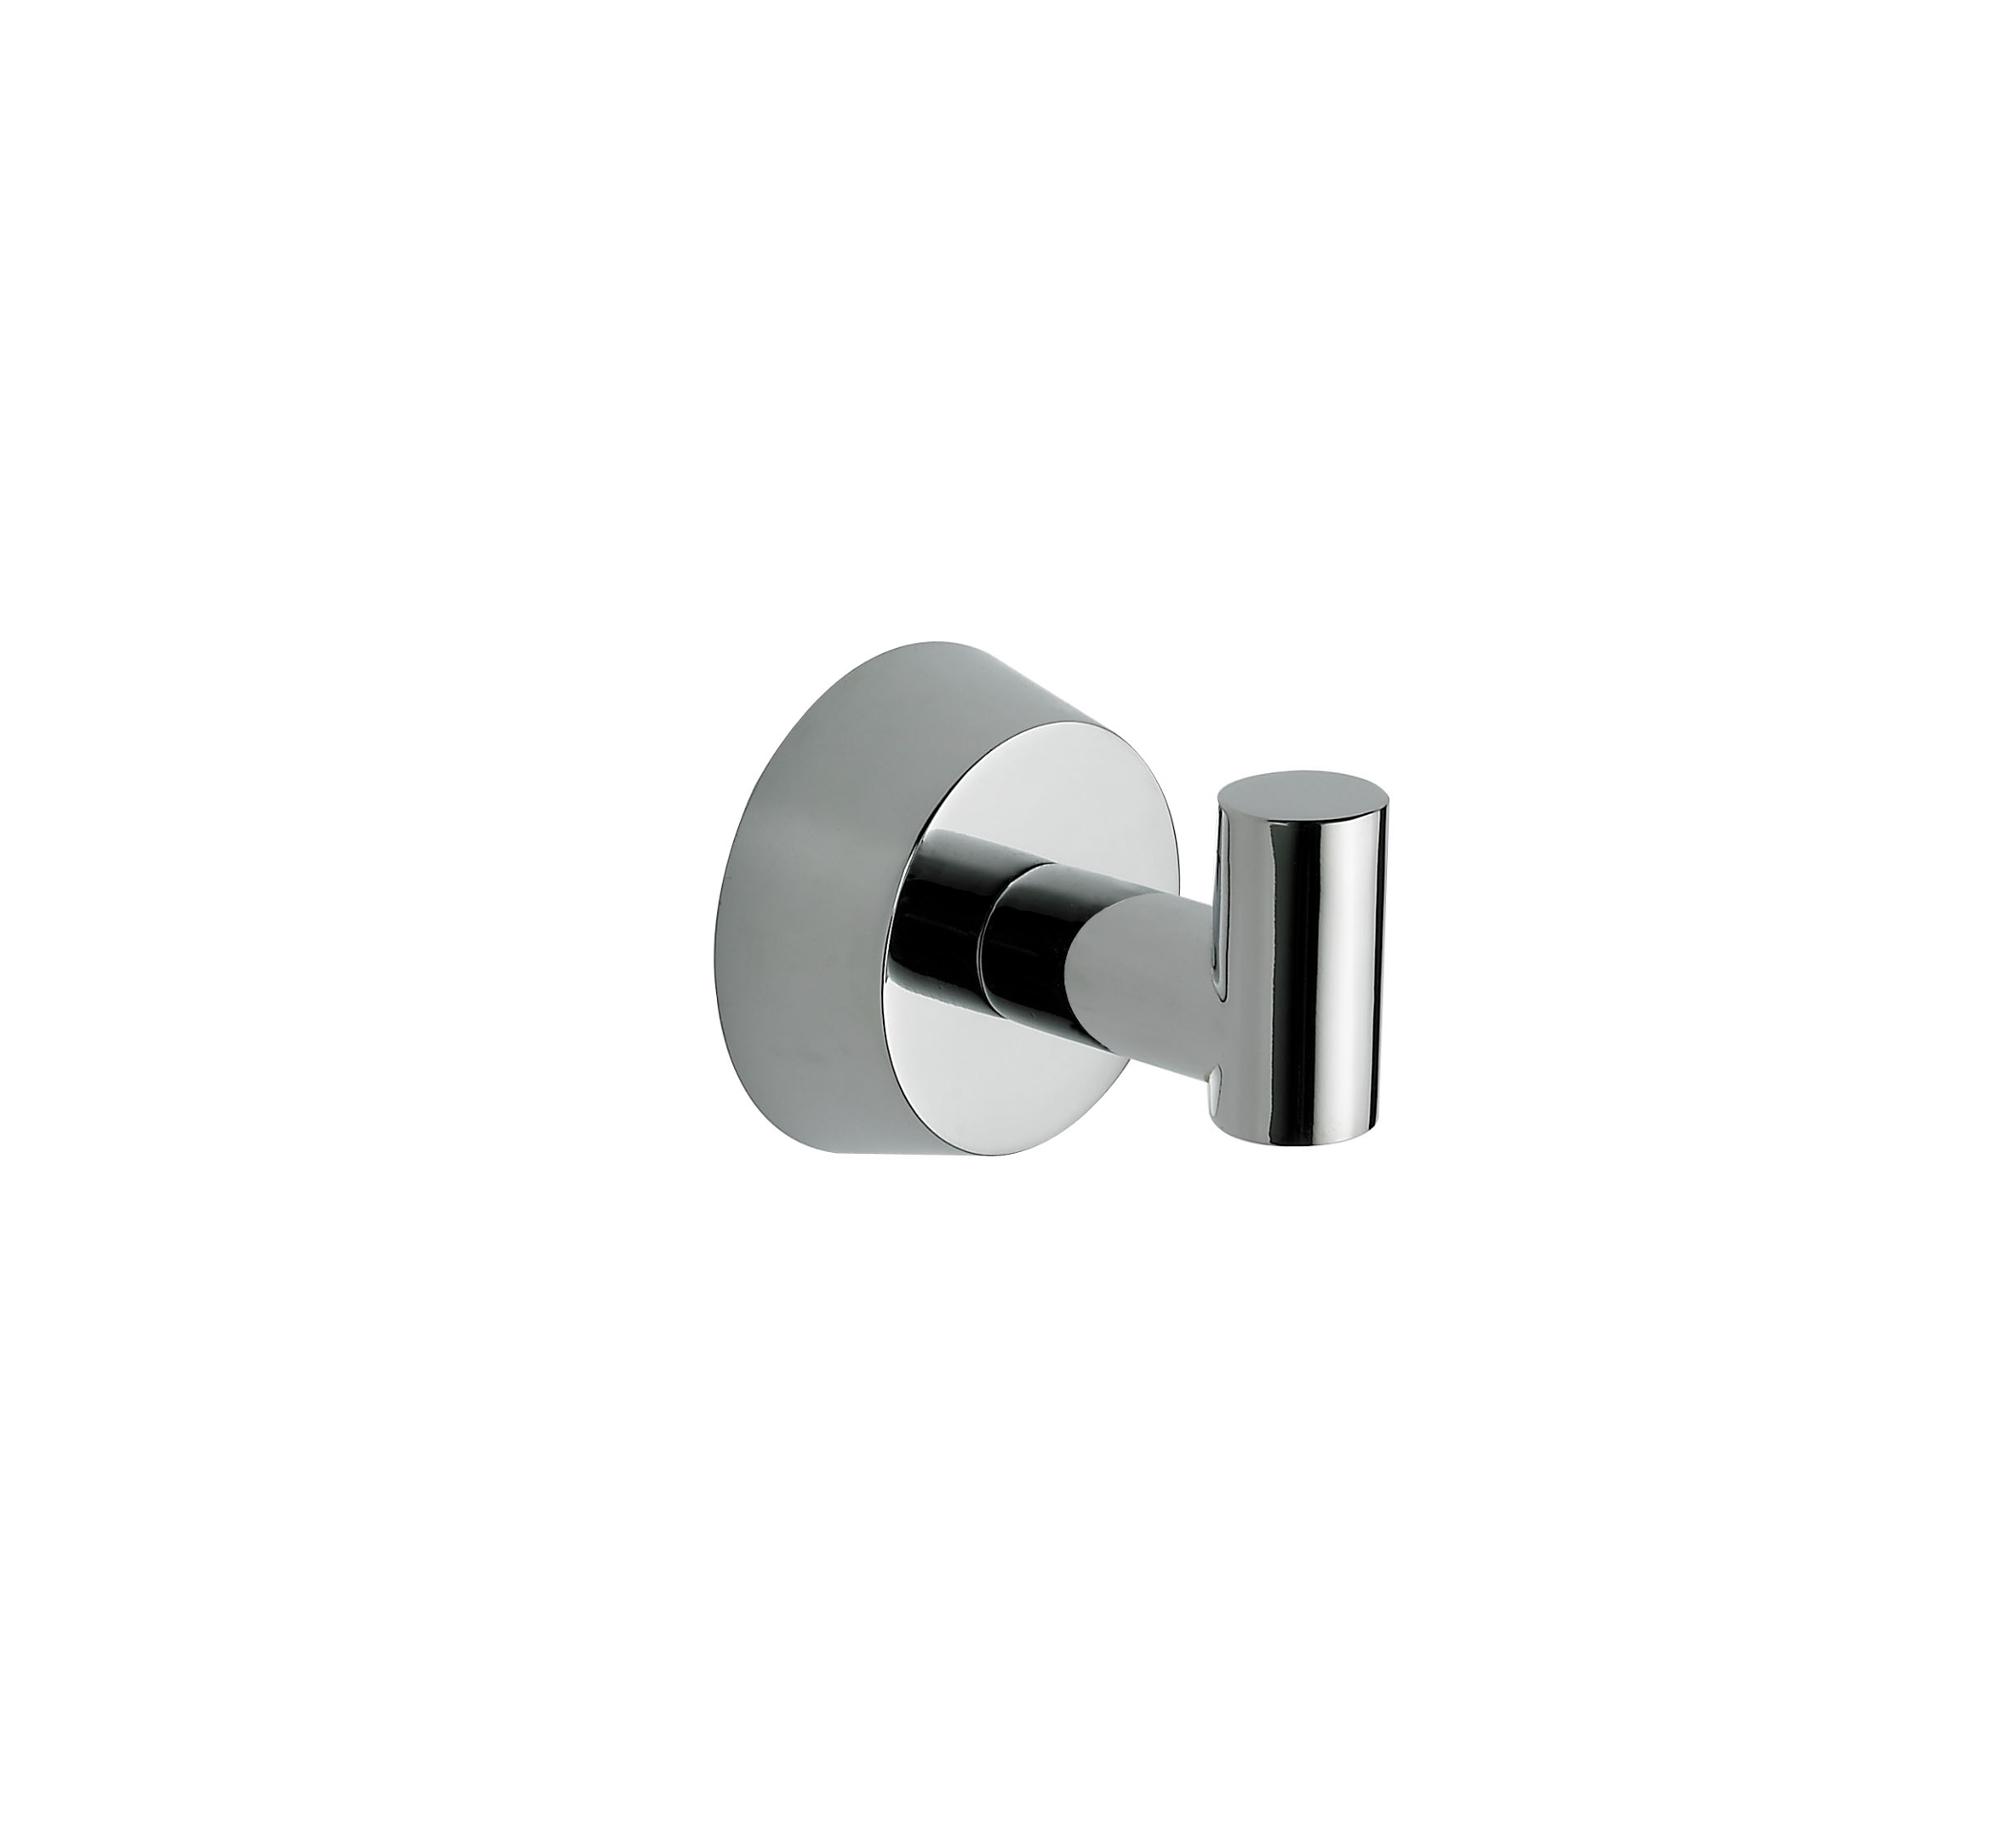 High End Latest Style Hot Sale Bathroom Accessories Metal Wall Mounted Chrome Robe Hook 1608